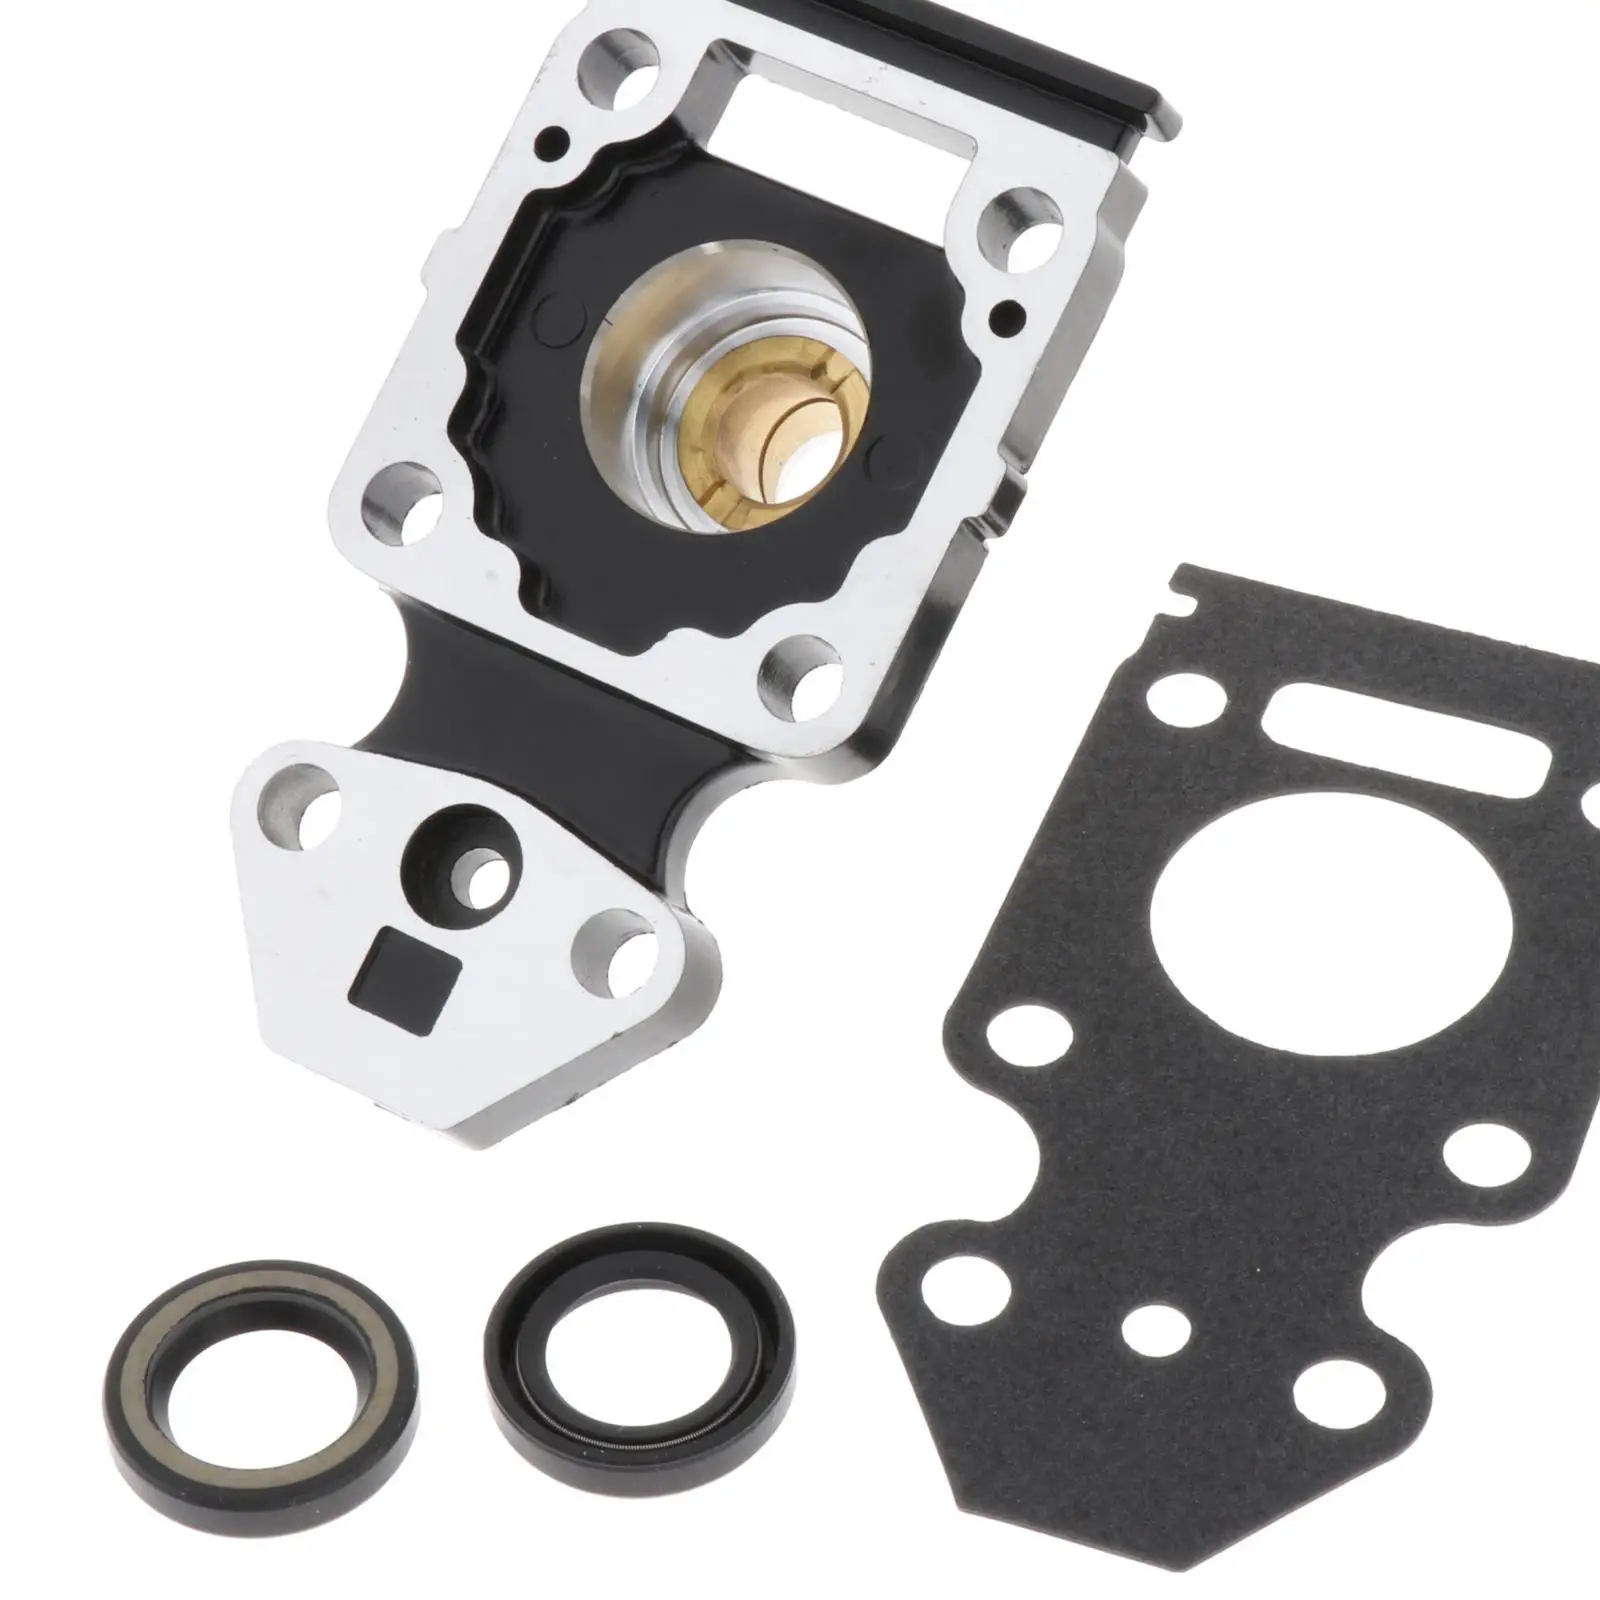 Housing Kit, Boat 3V-45331-00-5000  Outboard 9.15 Stroke for  Replace